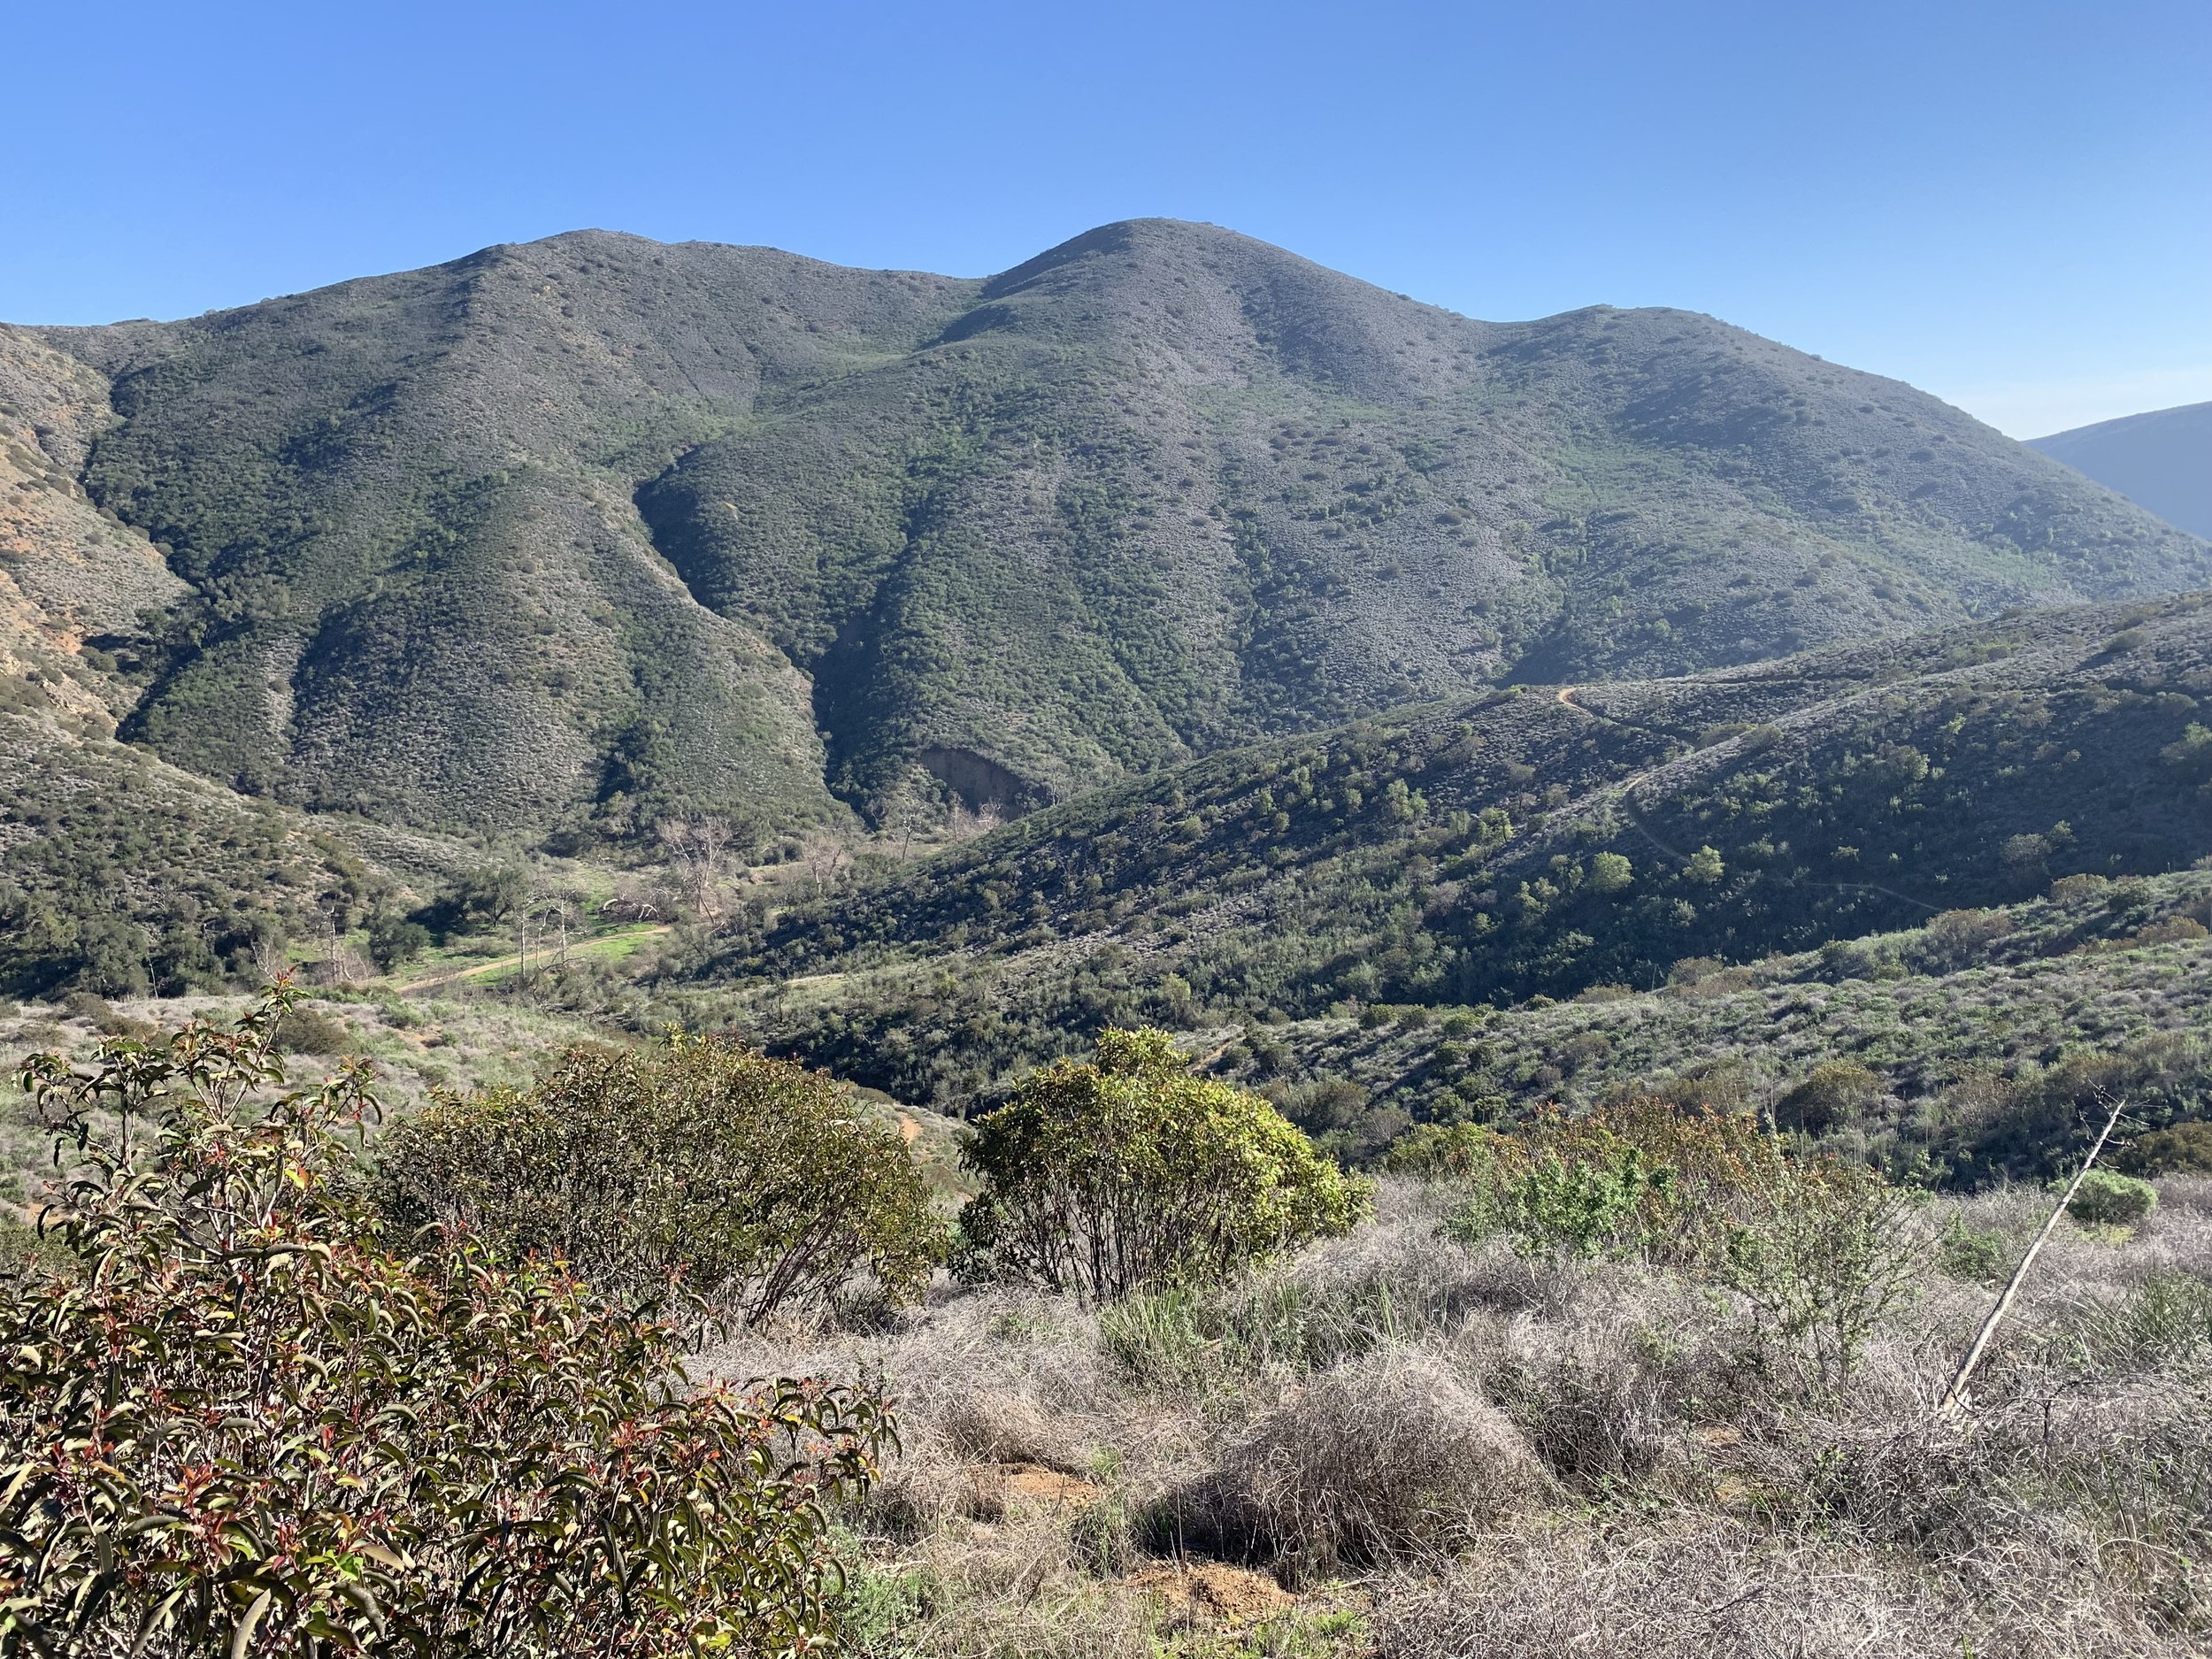 Looking into Sycamore Canyon